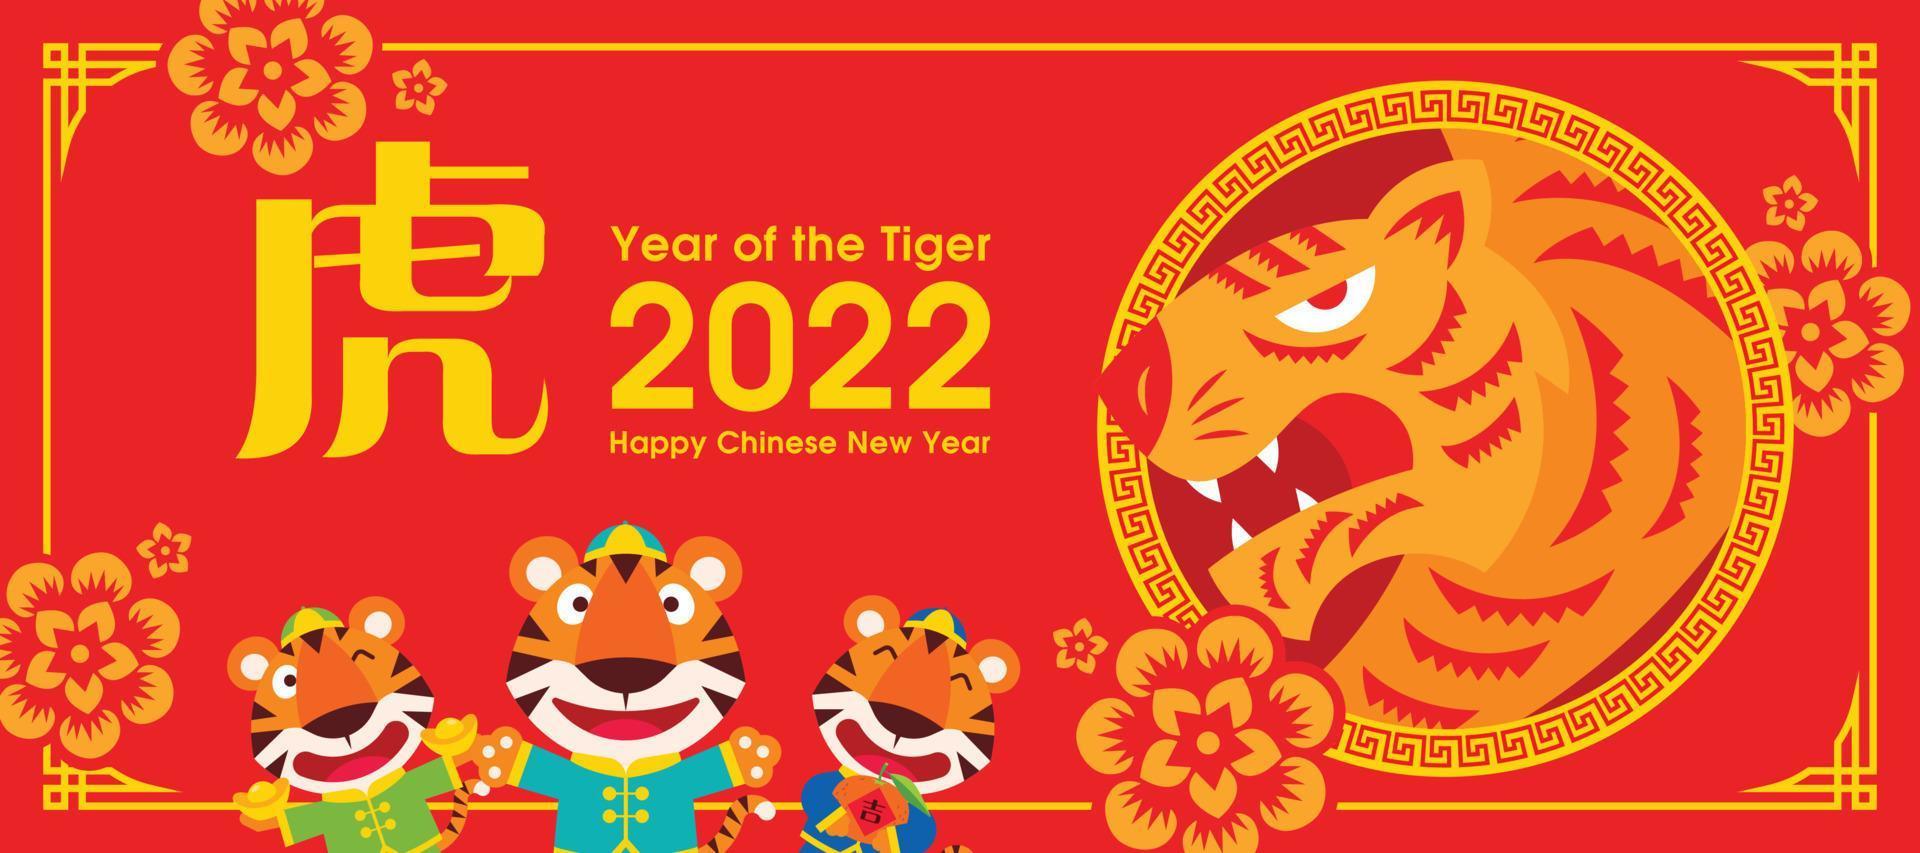 Chinese New Year 2022. Year of the tiger. Flat design cartoon tiger with paper cut of tiger symbol and oriental floral ornaments on greeting card vector